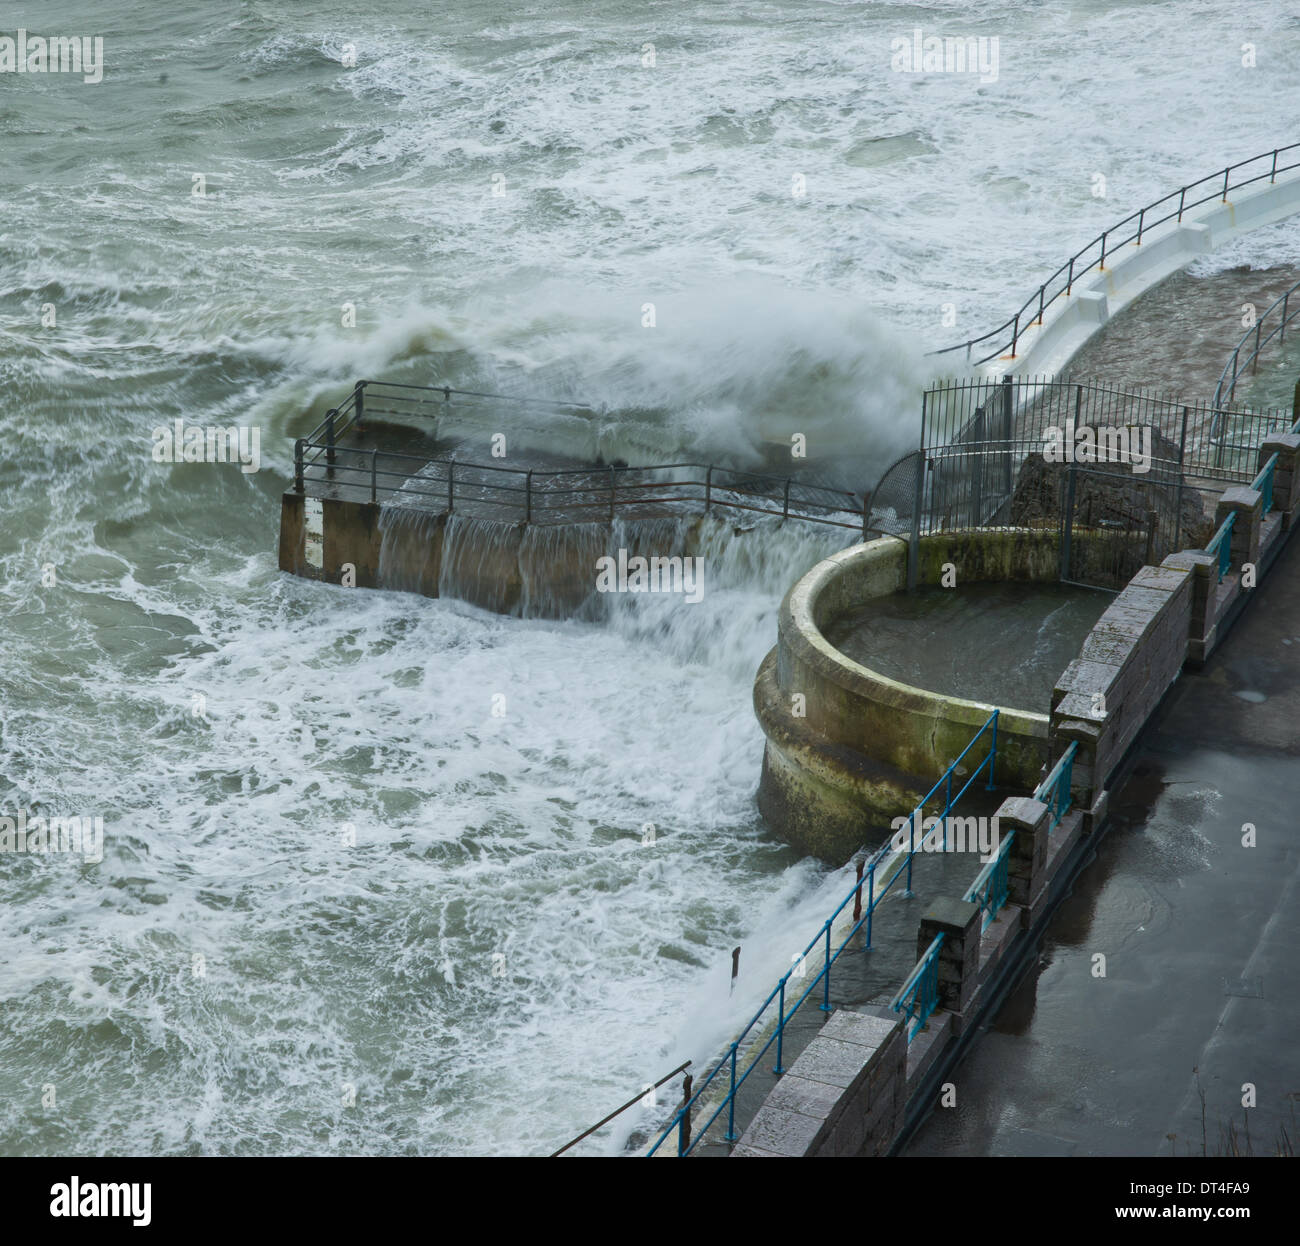 Plymouth, Devon, UK. 8th February 2014. Waves crash up the high walls of the lido, Plymouth, England during a passing storm. Credit:  Anna Stevenson/Alamy Live News Stock Photo